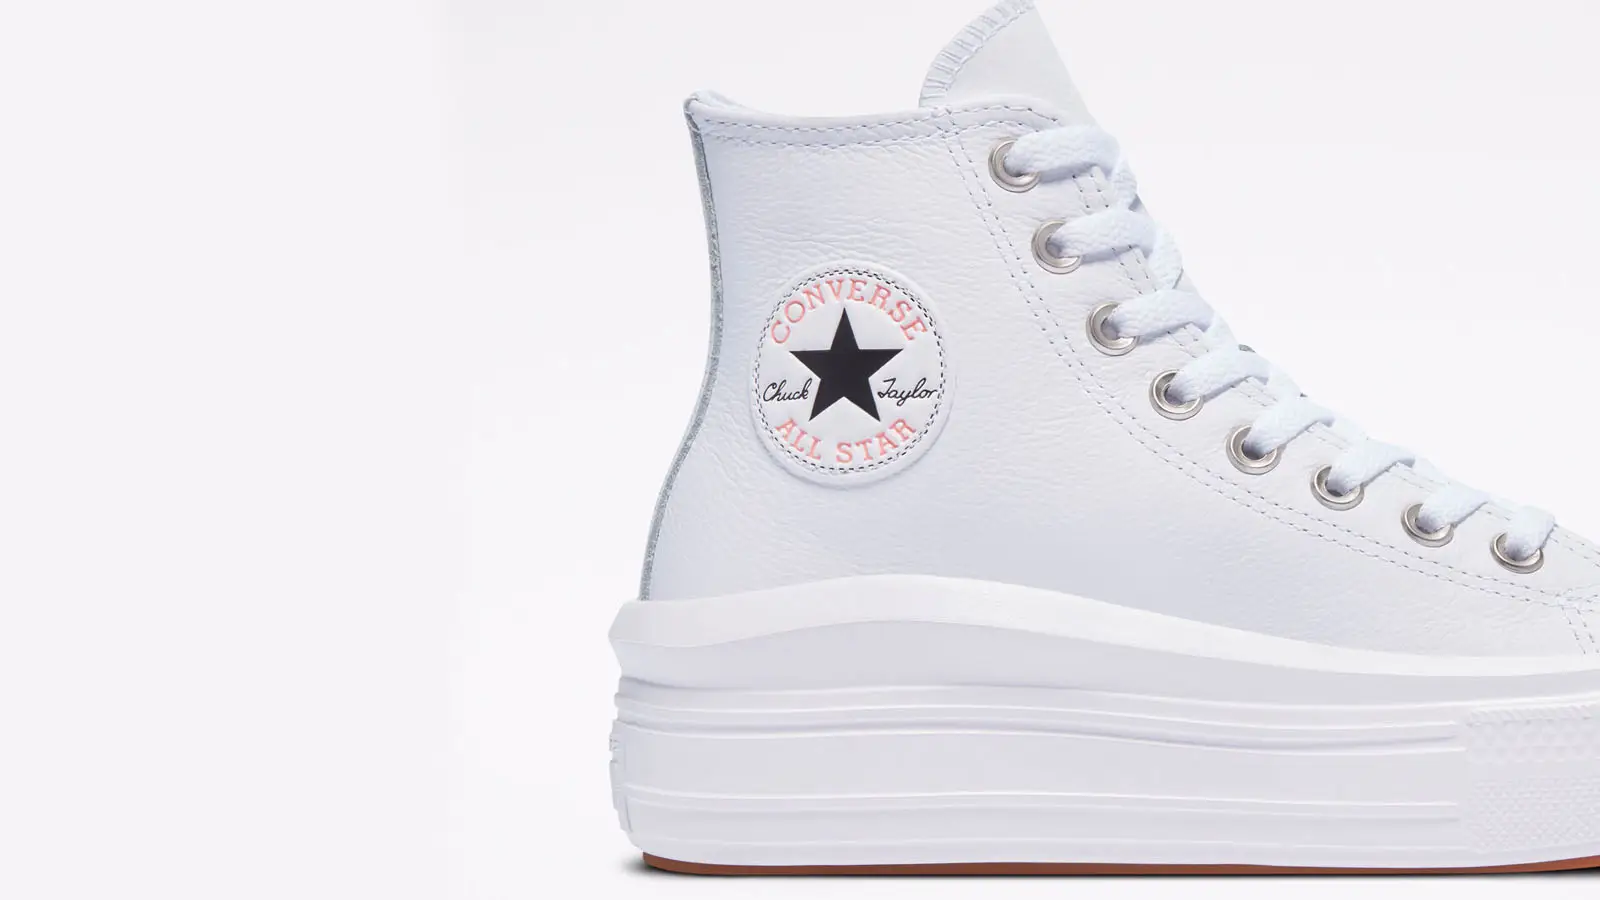 Converse x Stussy Pro Leather FS MID sneakers